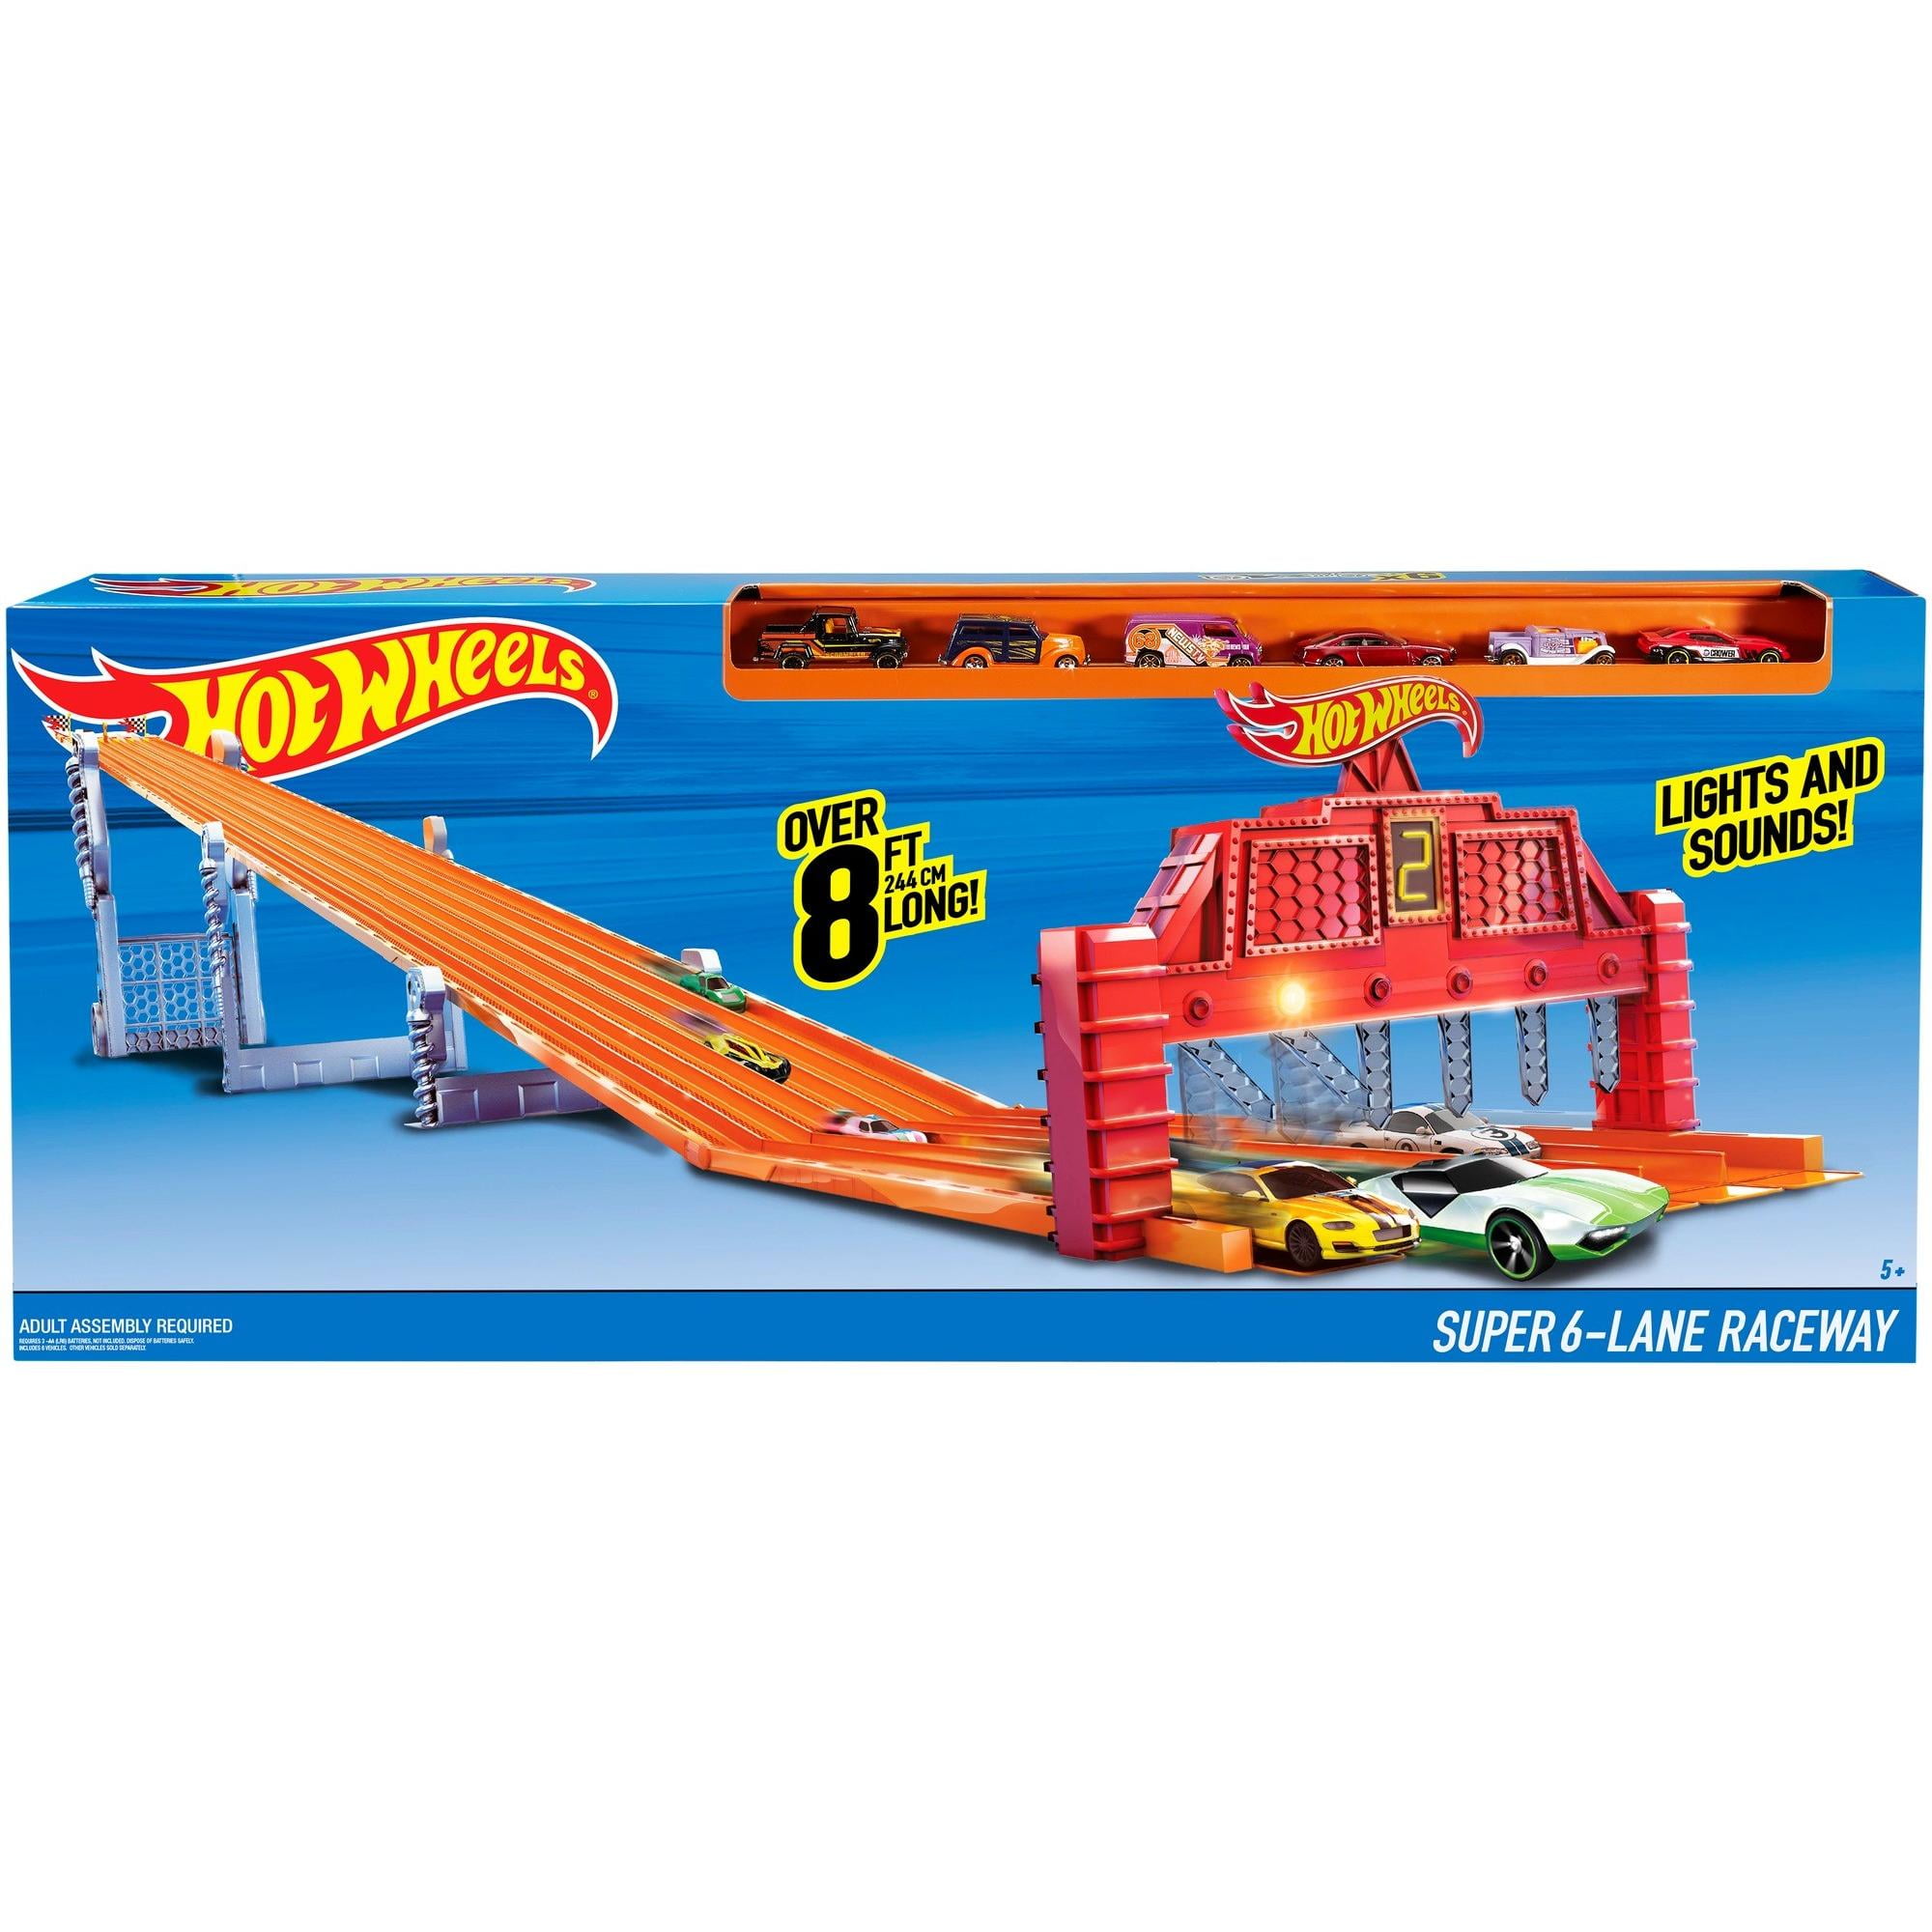 Super 6 Lane Raceway Finish Line Extender hot Wheels Super 6 Raceway  Extension Compatible With Hot Wheels and Matchbox Cars and Track 